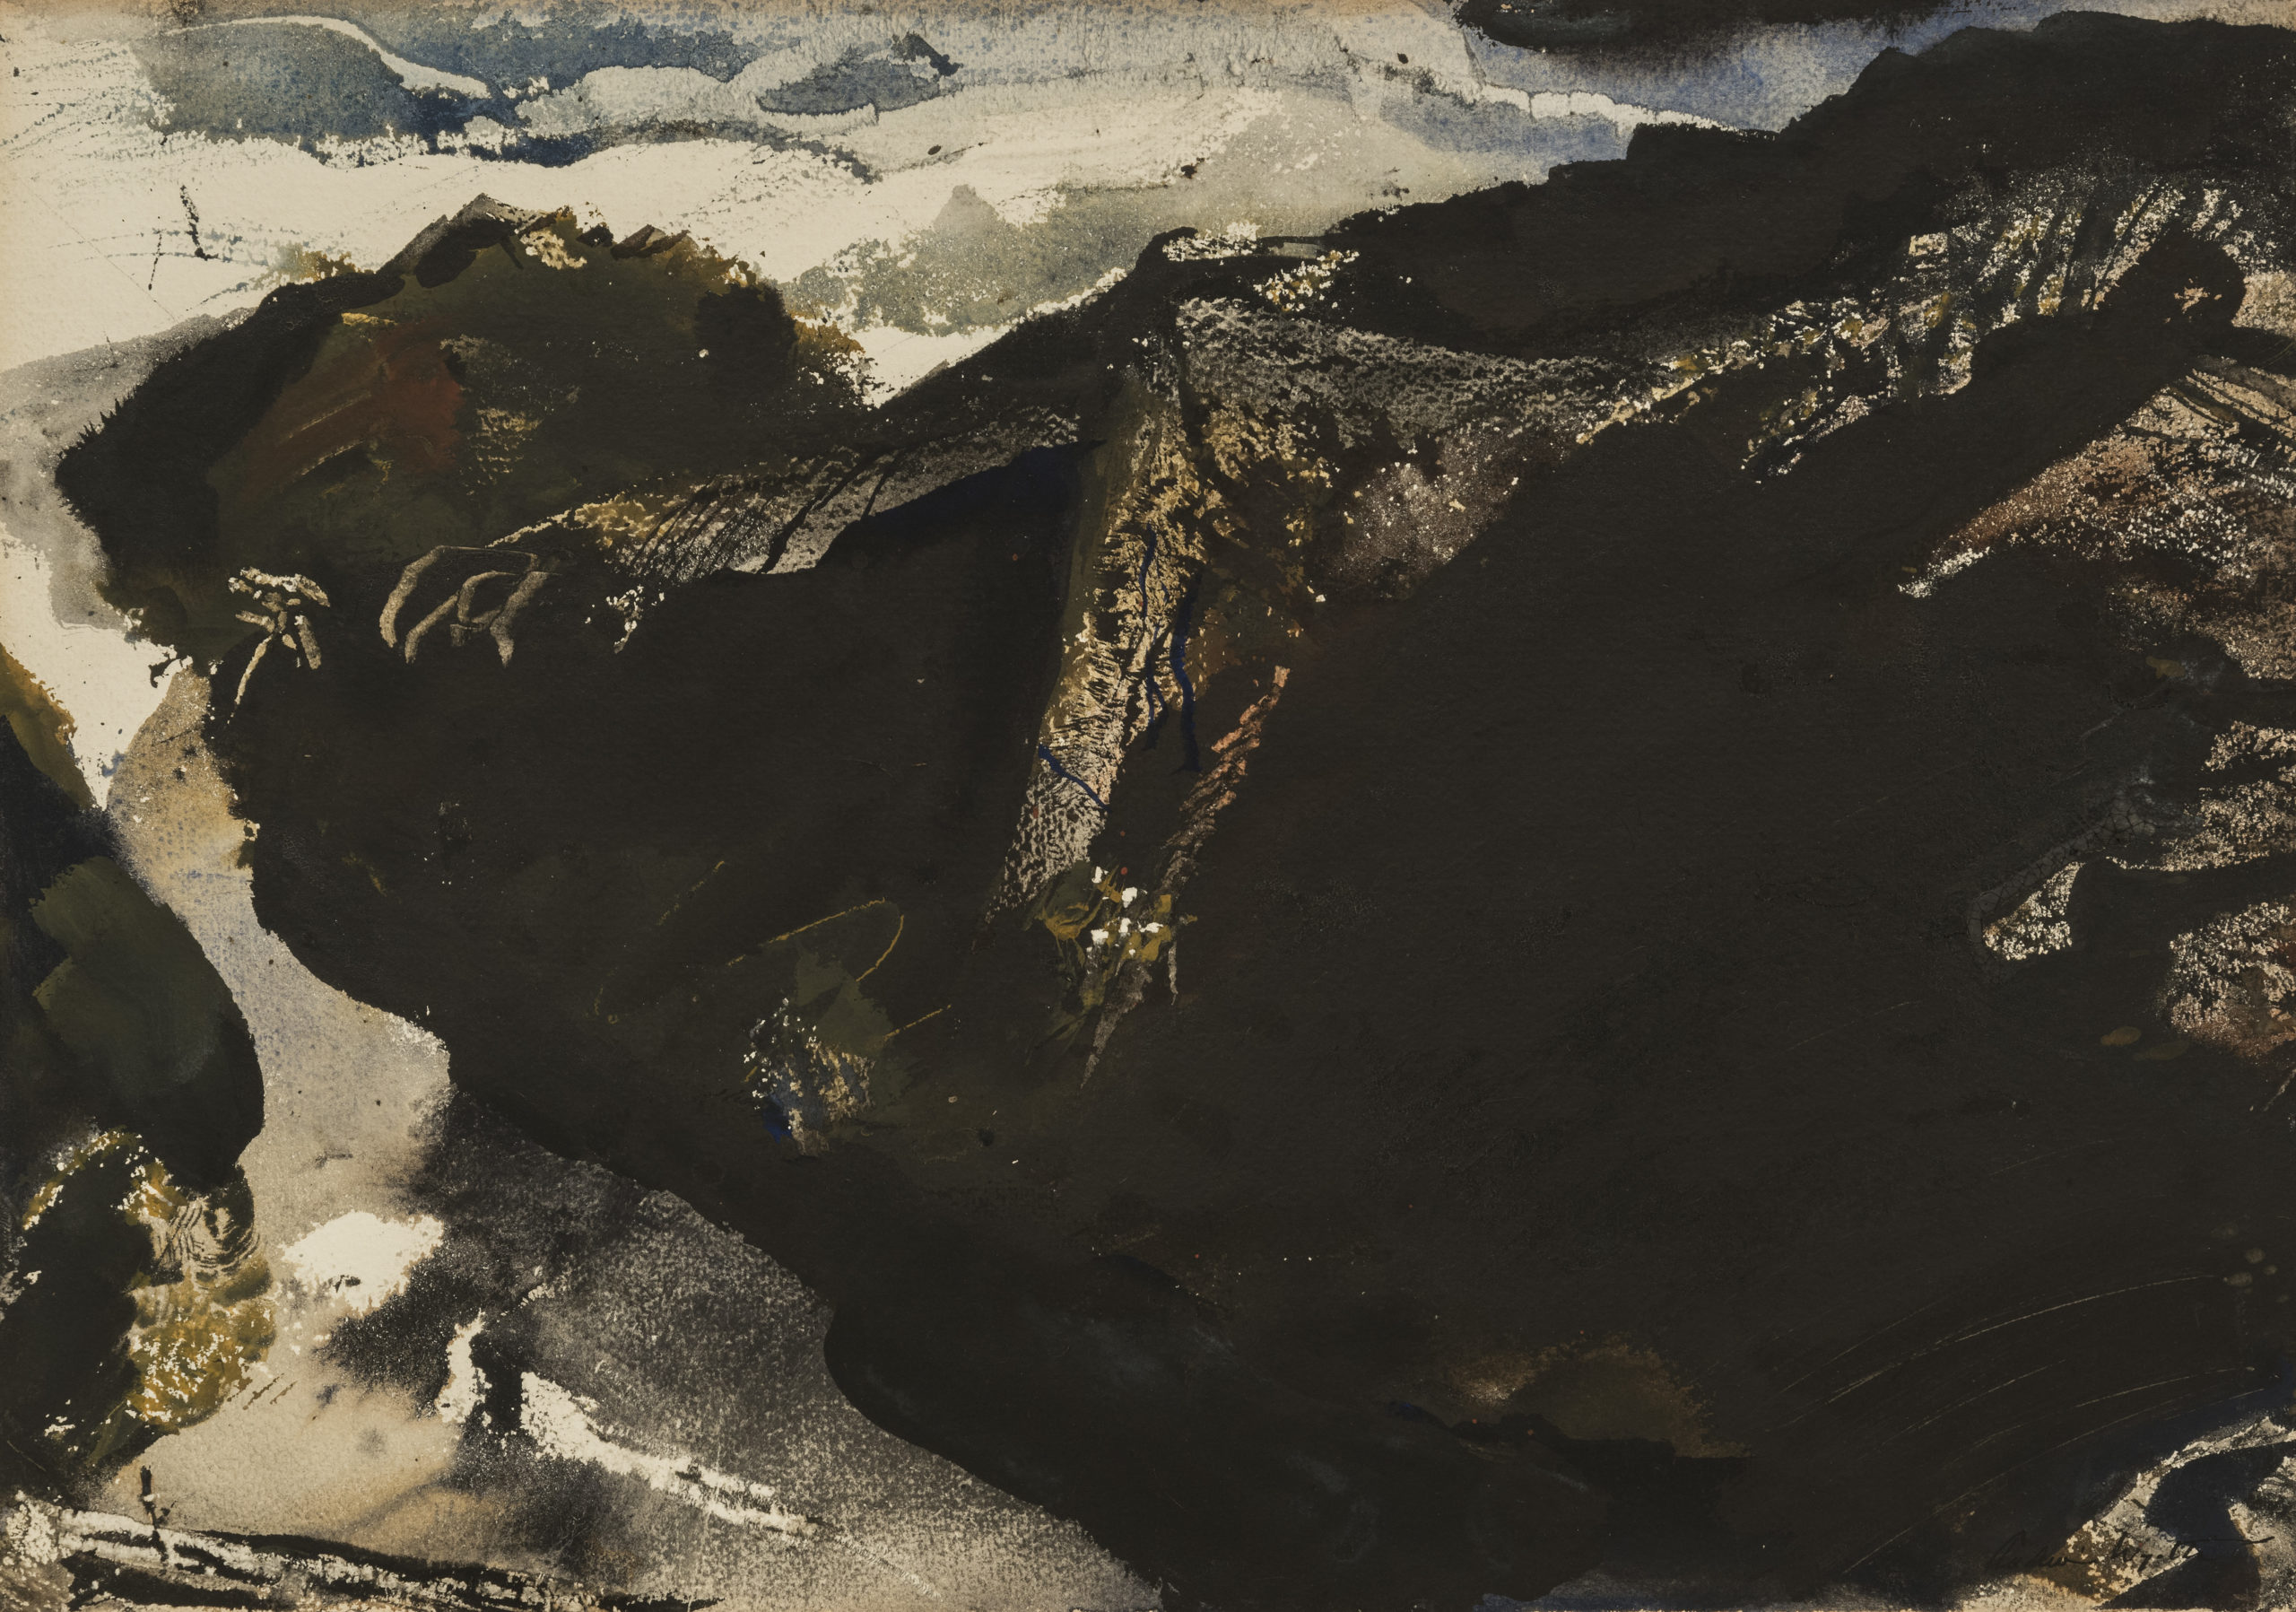 
		                					Andrew Wyeth		                																	
																											<i>Roaring Spout,</i>  
																																								1953, 
																																								watercolor on paper, 
																																								13 7/8 x 19 3/4 inches 
																								
		                				